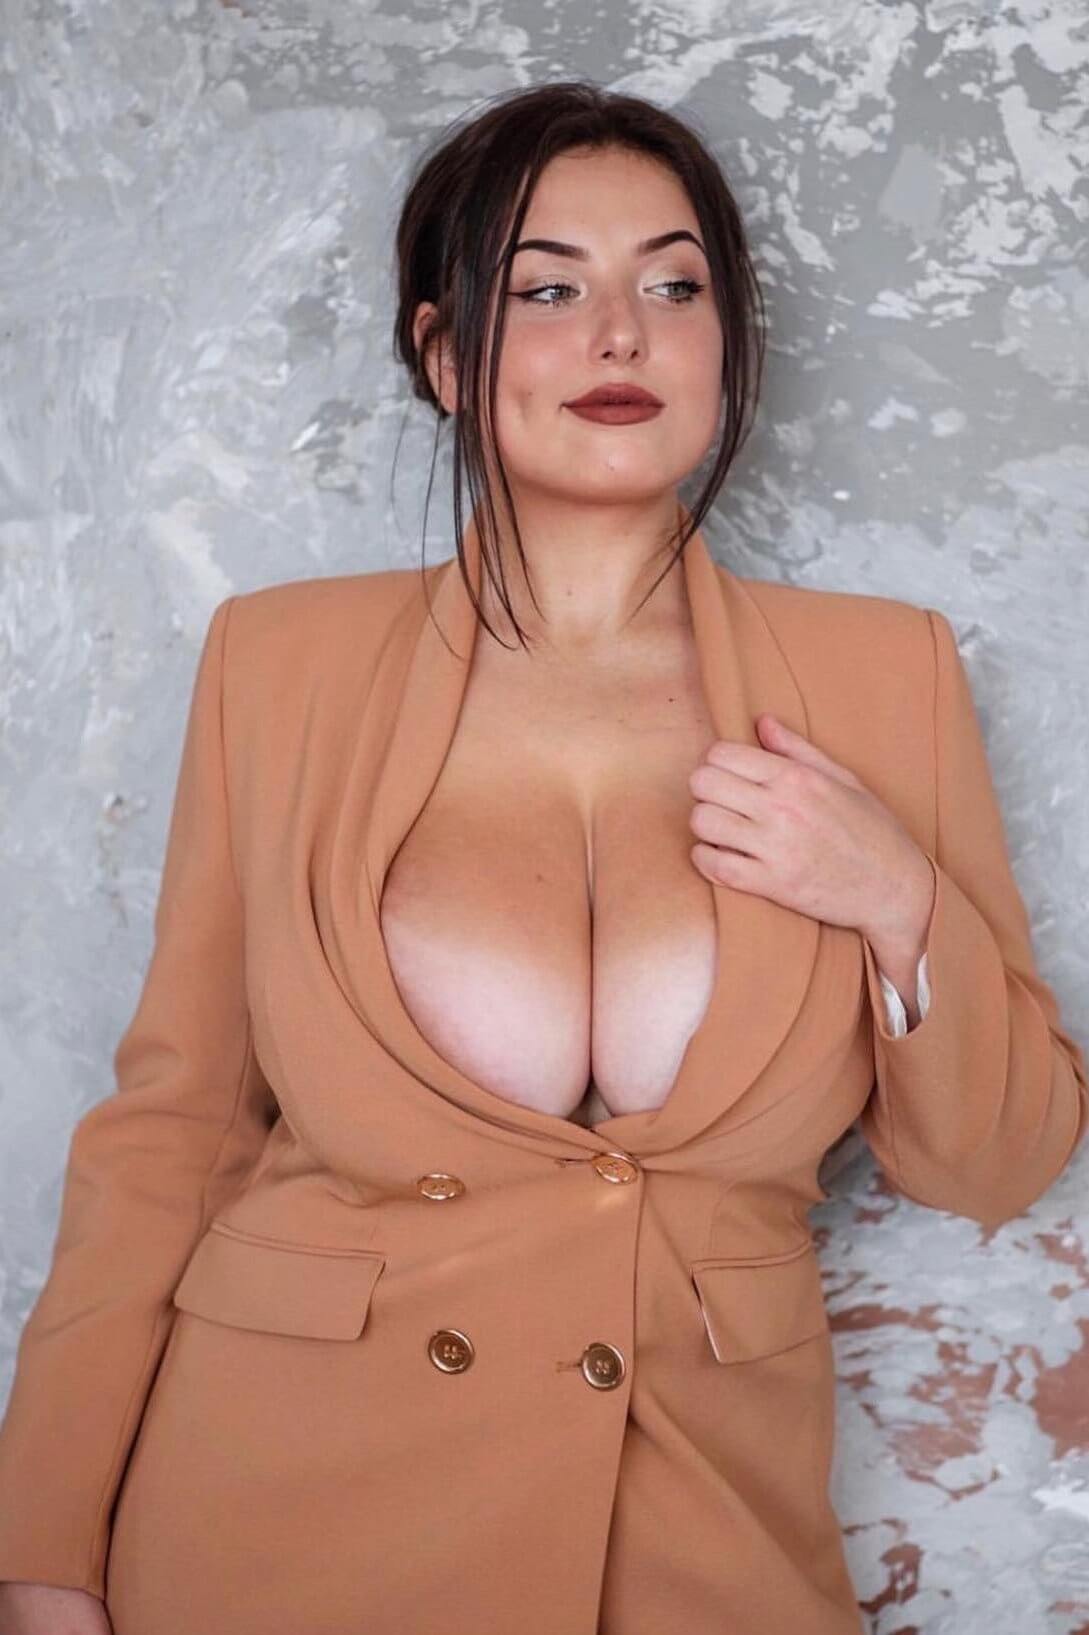 Cleavage of the Day trophy to Miss Milada! · Pandesia World